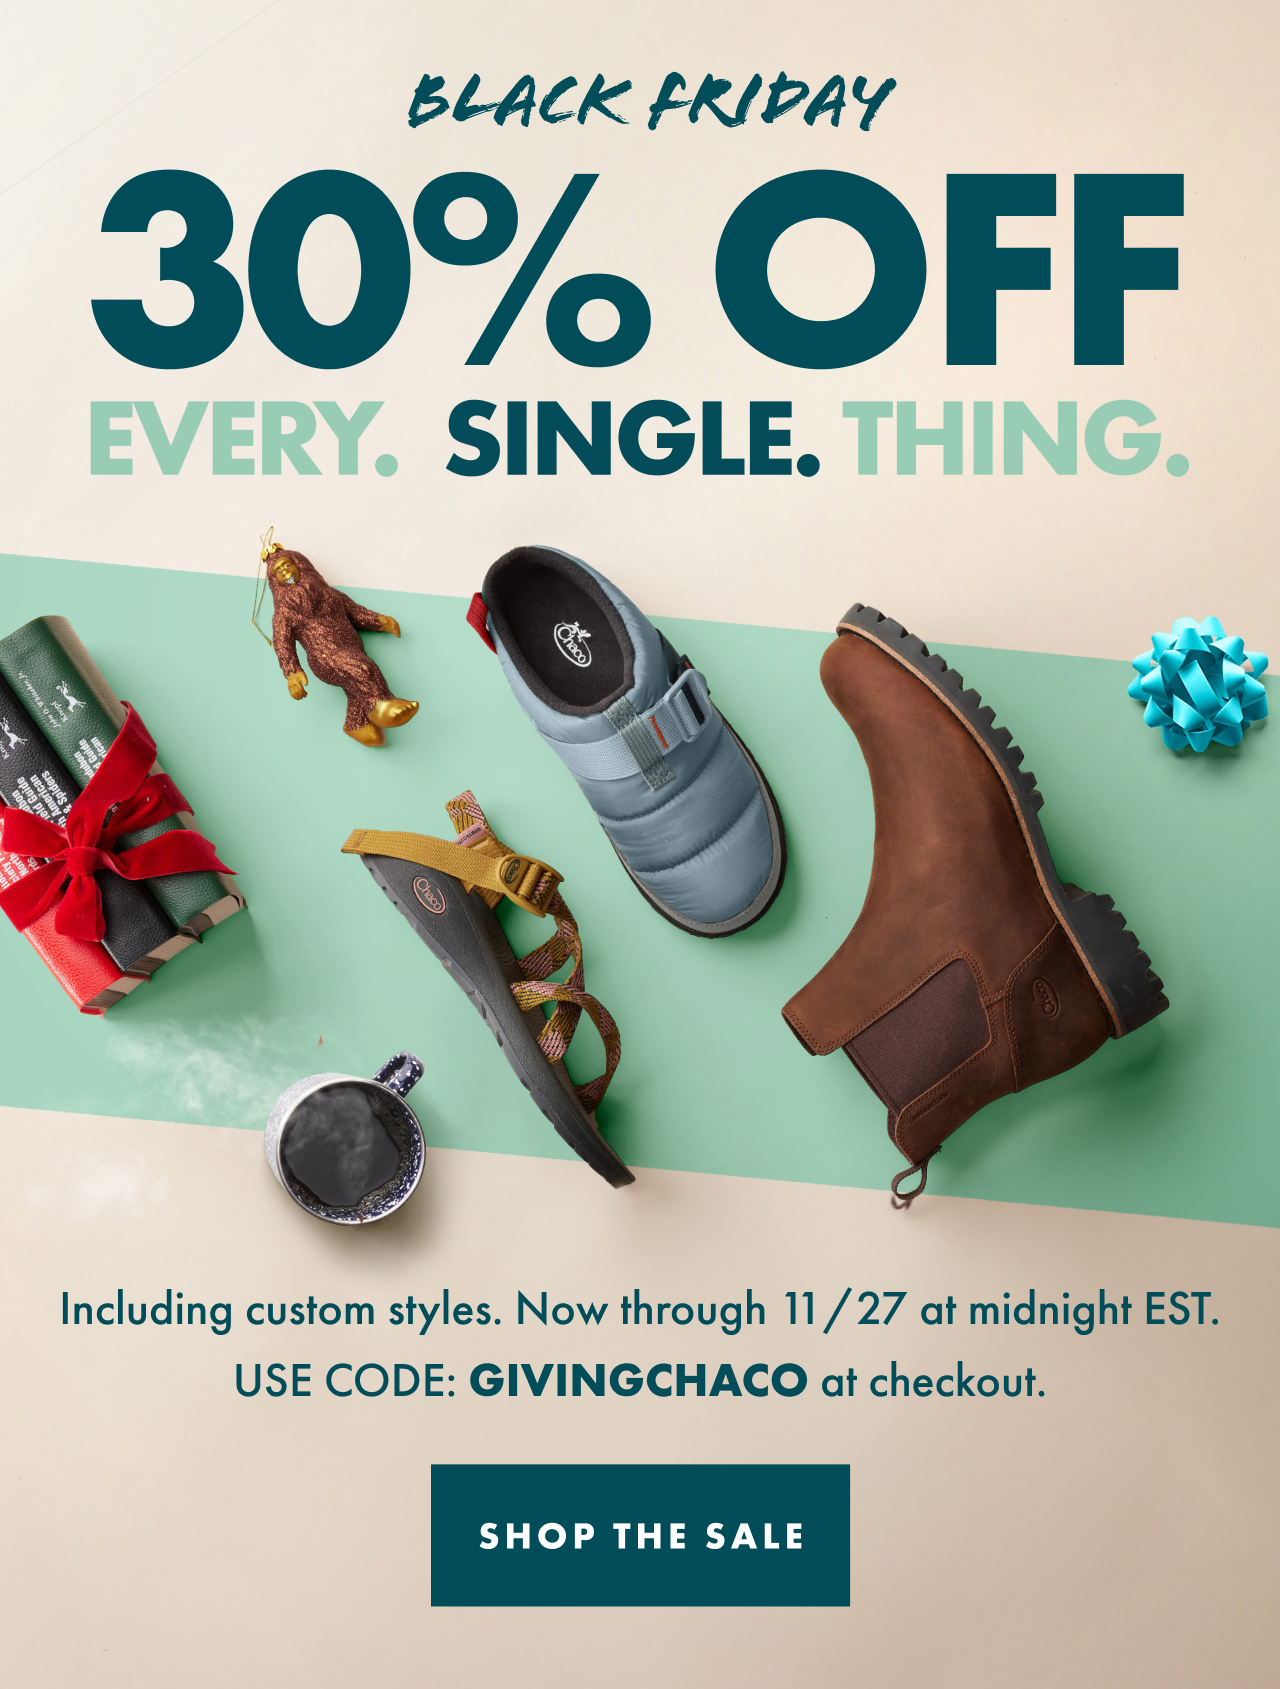 CHACO - Black friday 30% off every single thing. Including custom styles. Now through november 27th at midnight est. use code GIVINGCHACO at checkout. Shop the sale